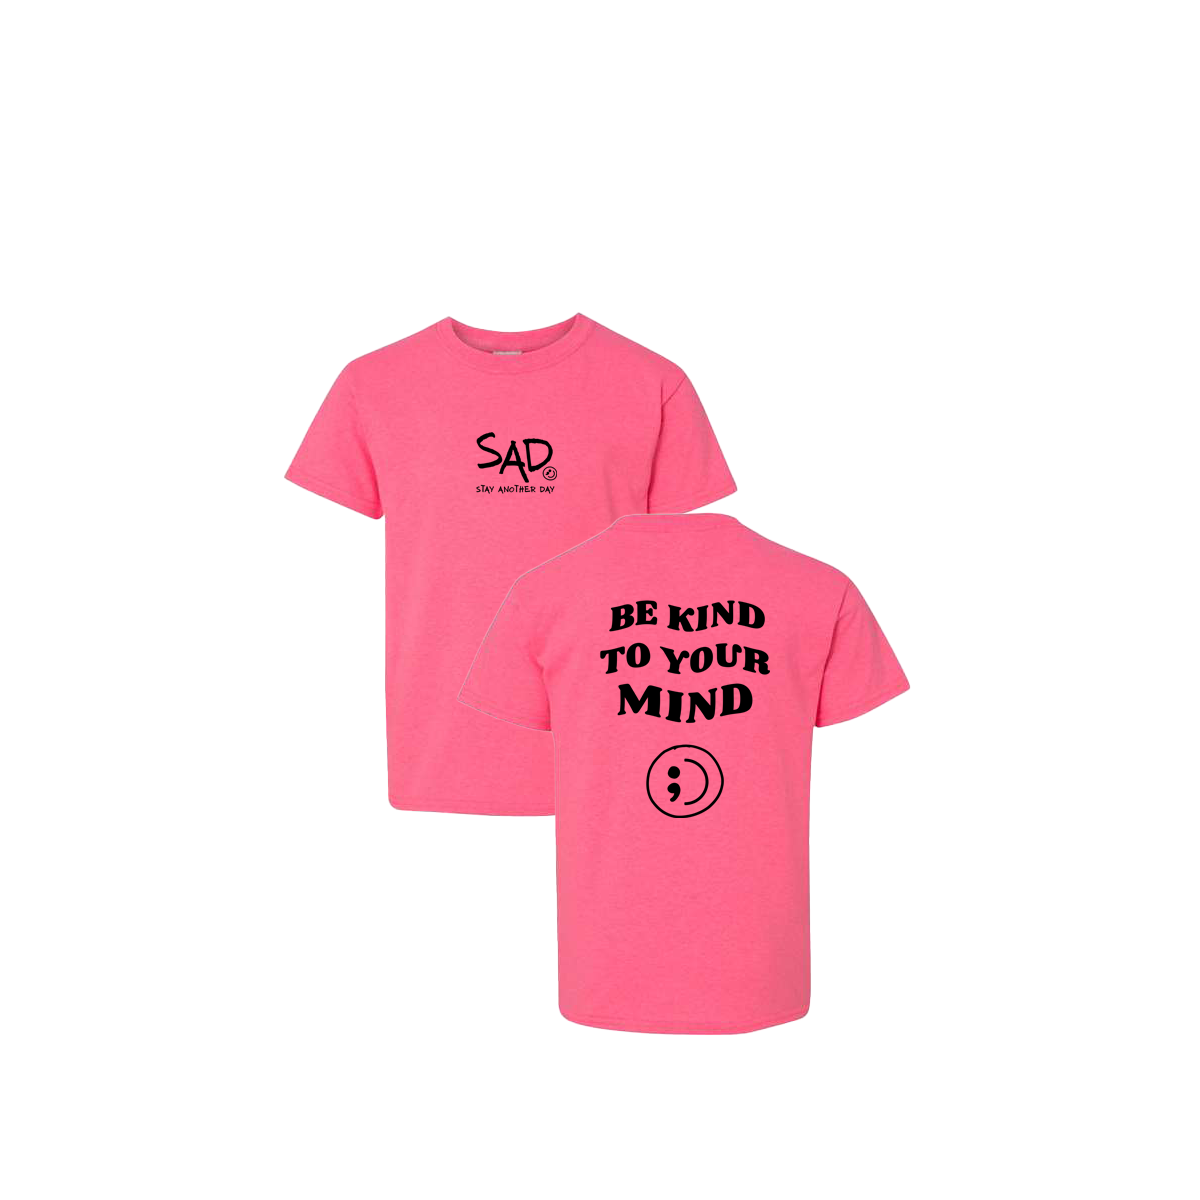 Be Kind To Your Mind Screen Printed Safety Pink Youth Tshirt